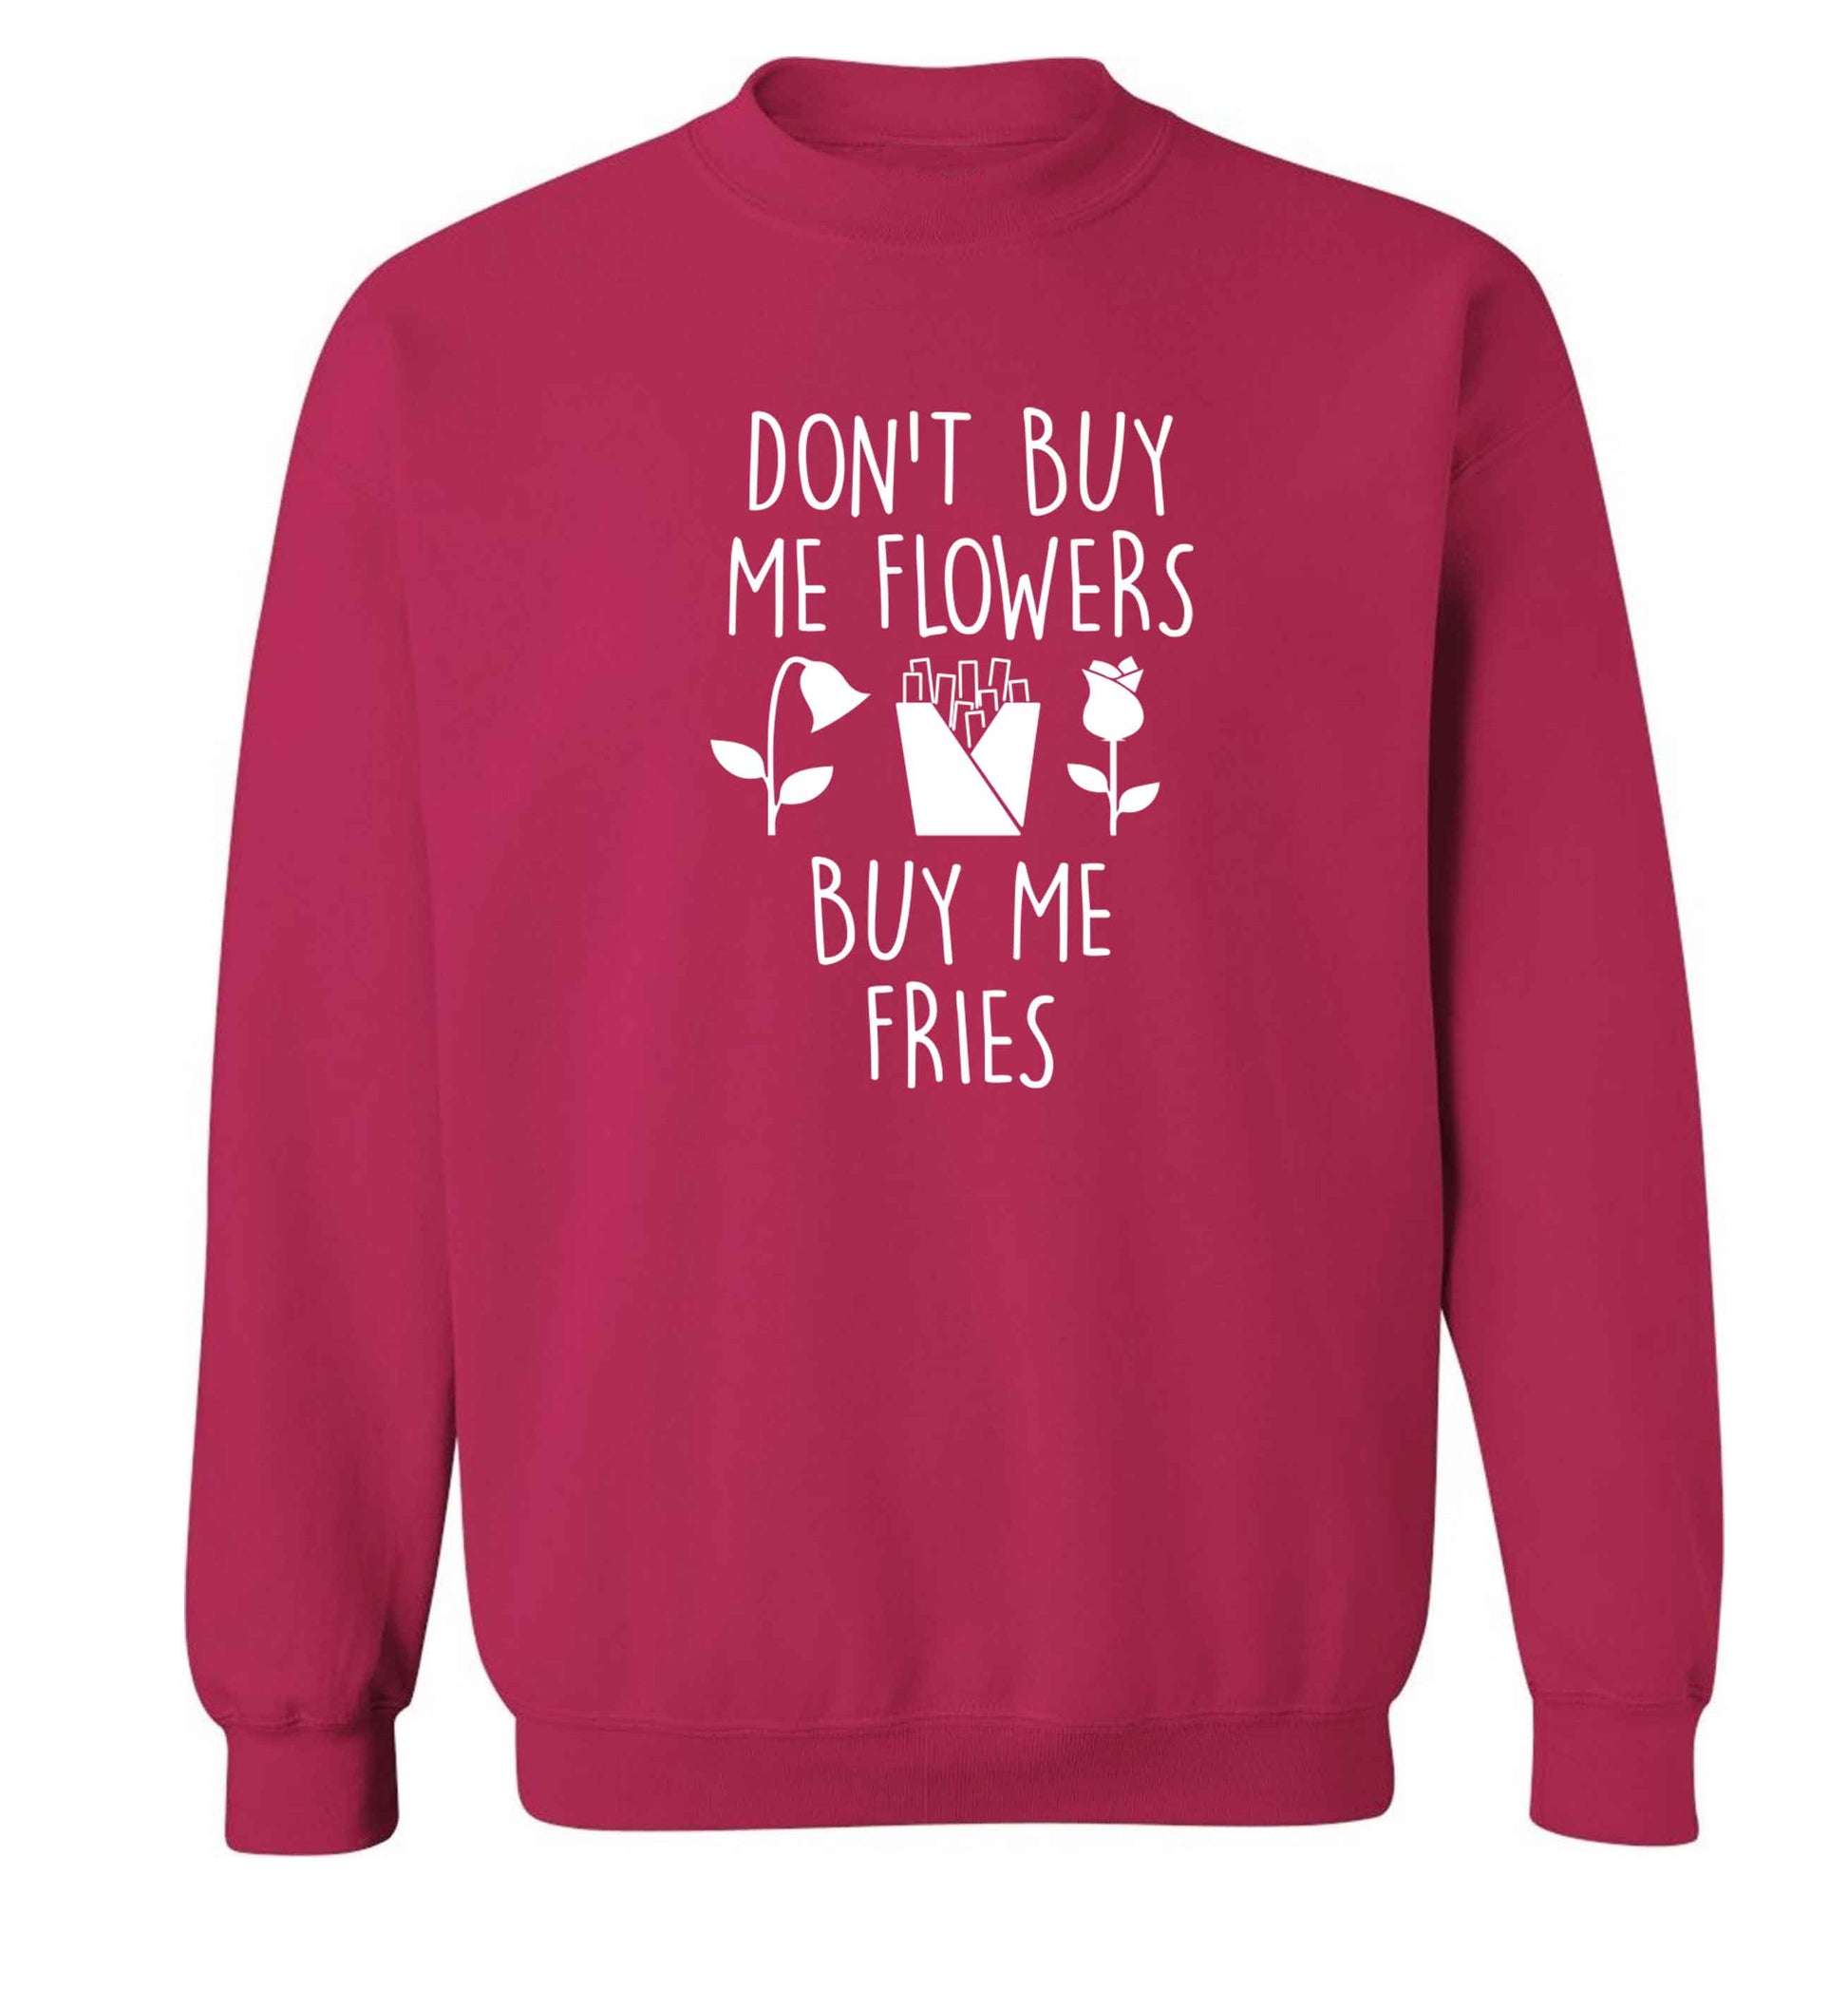 Don't buy me flowers buy me fries adult's unisex pink sweater 2XL